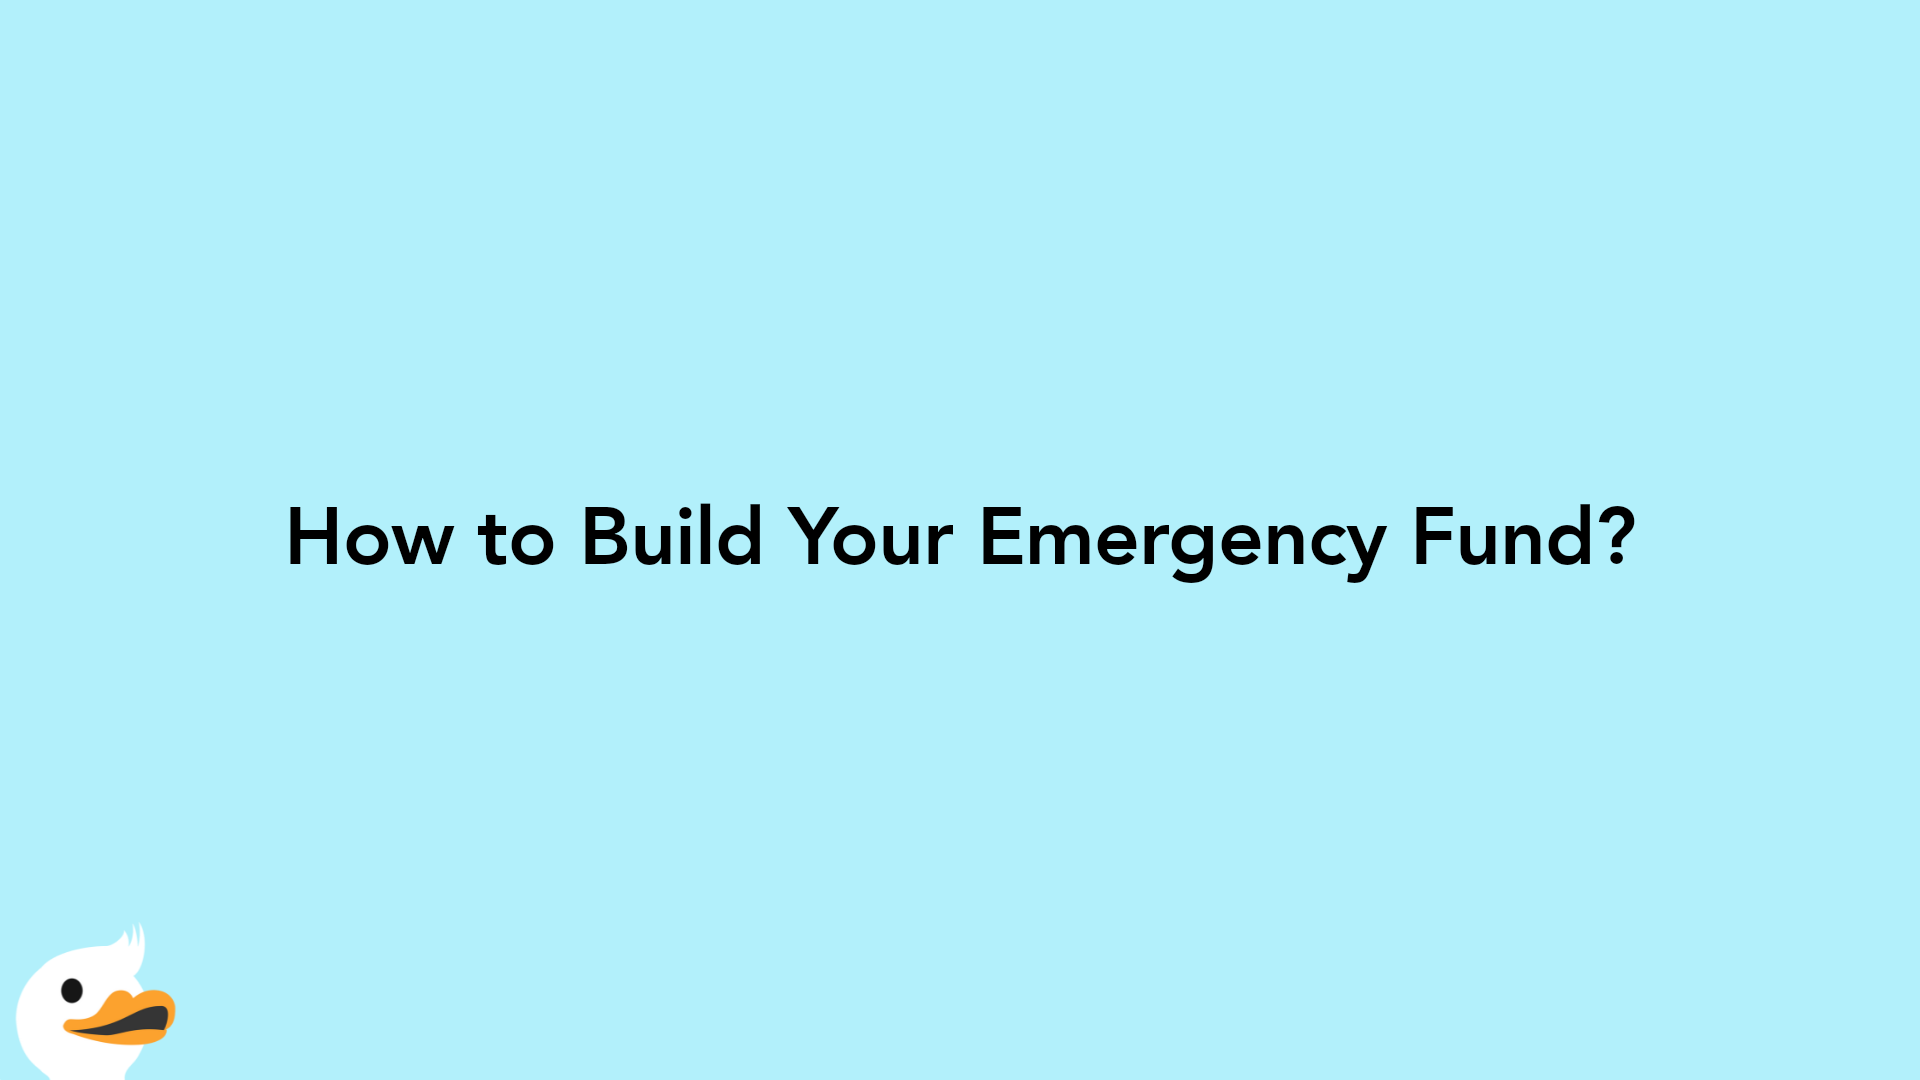 How to Build Your Emergency Fund?